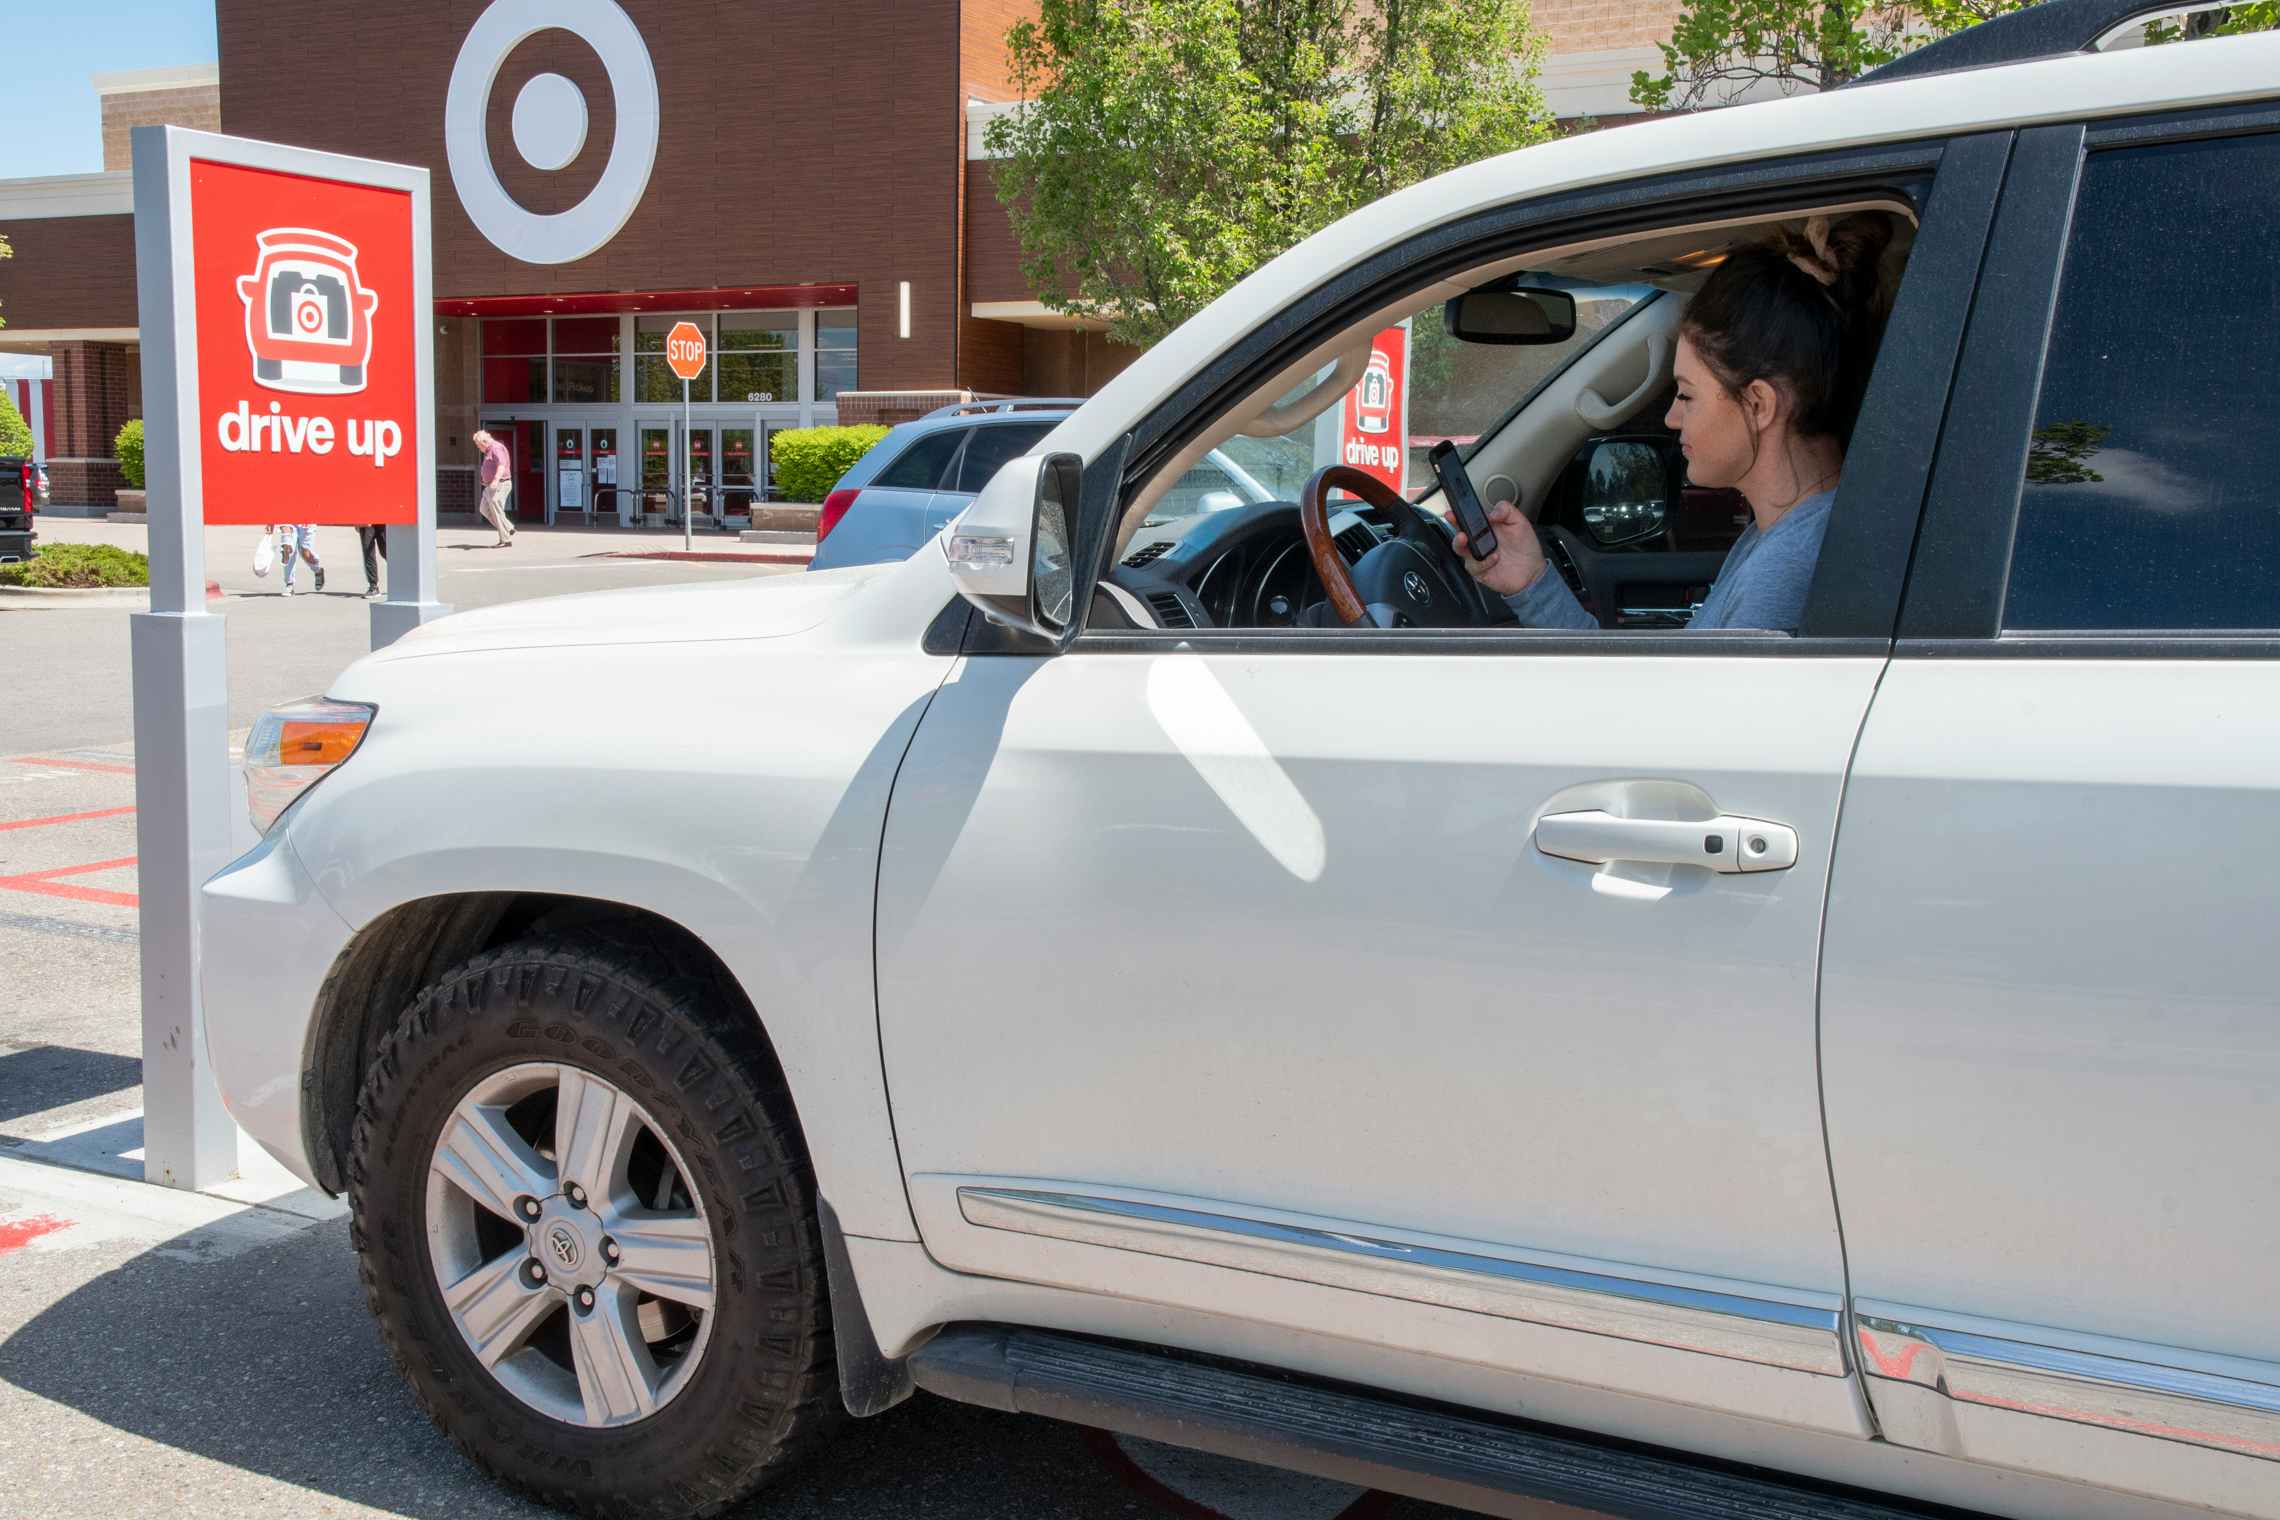 Target Offering Delivery, Pickup For Alcohol